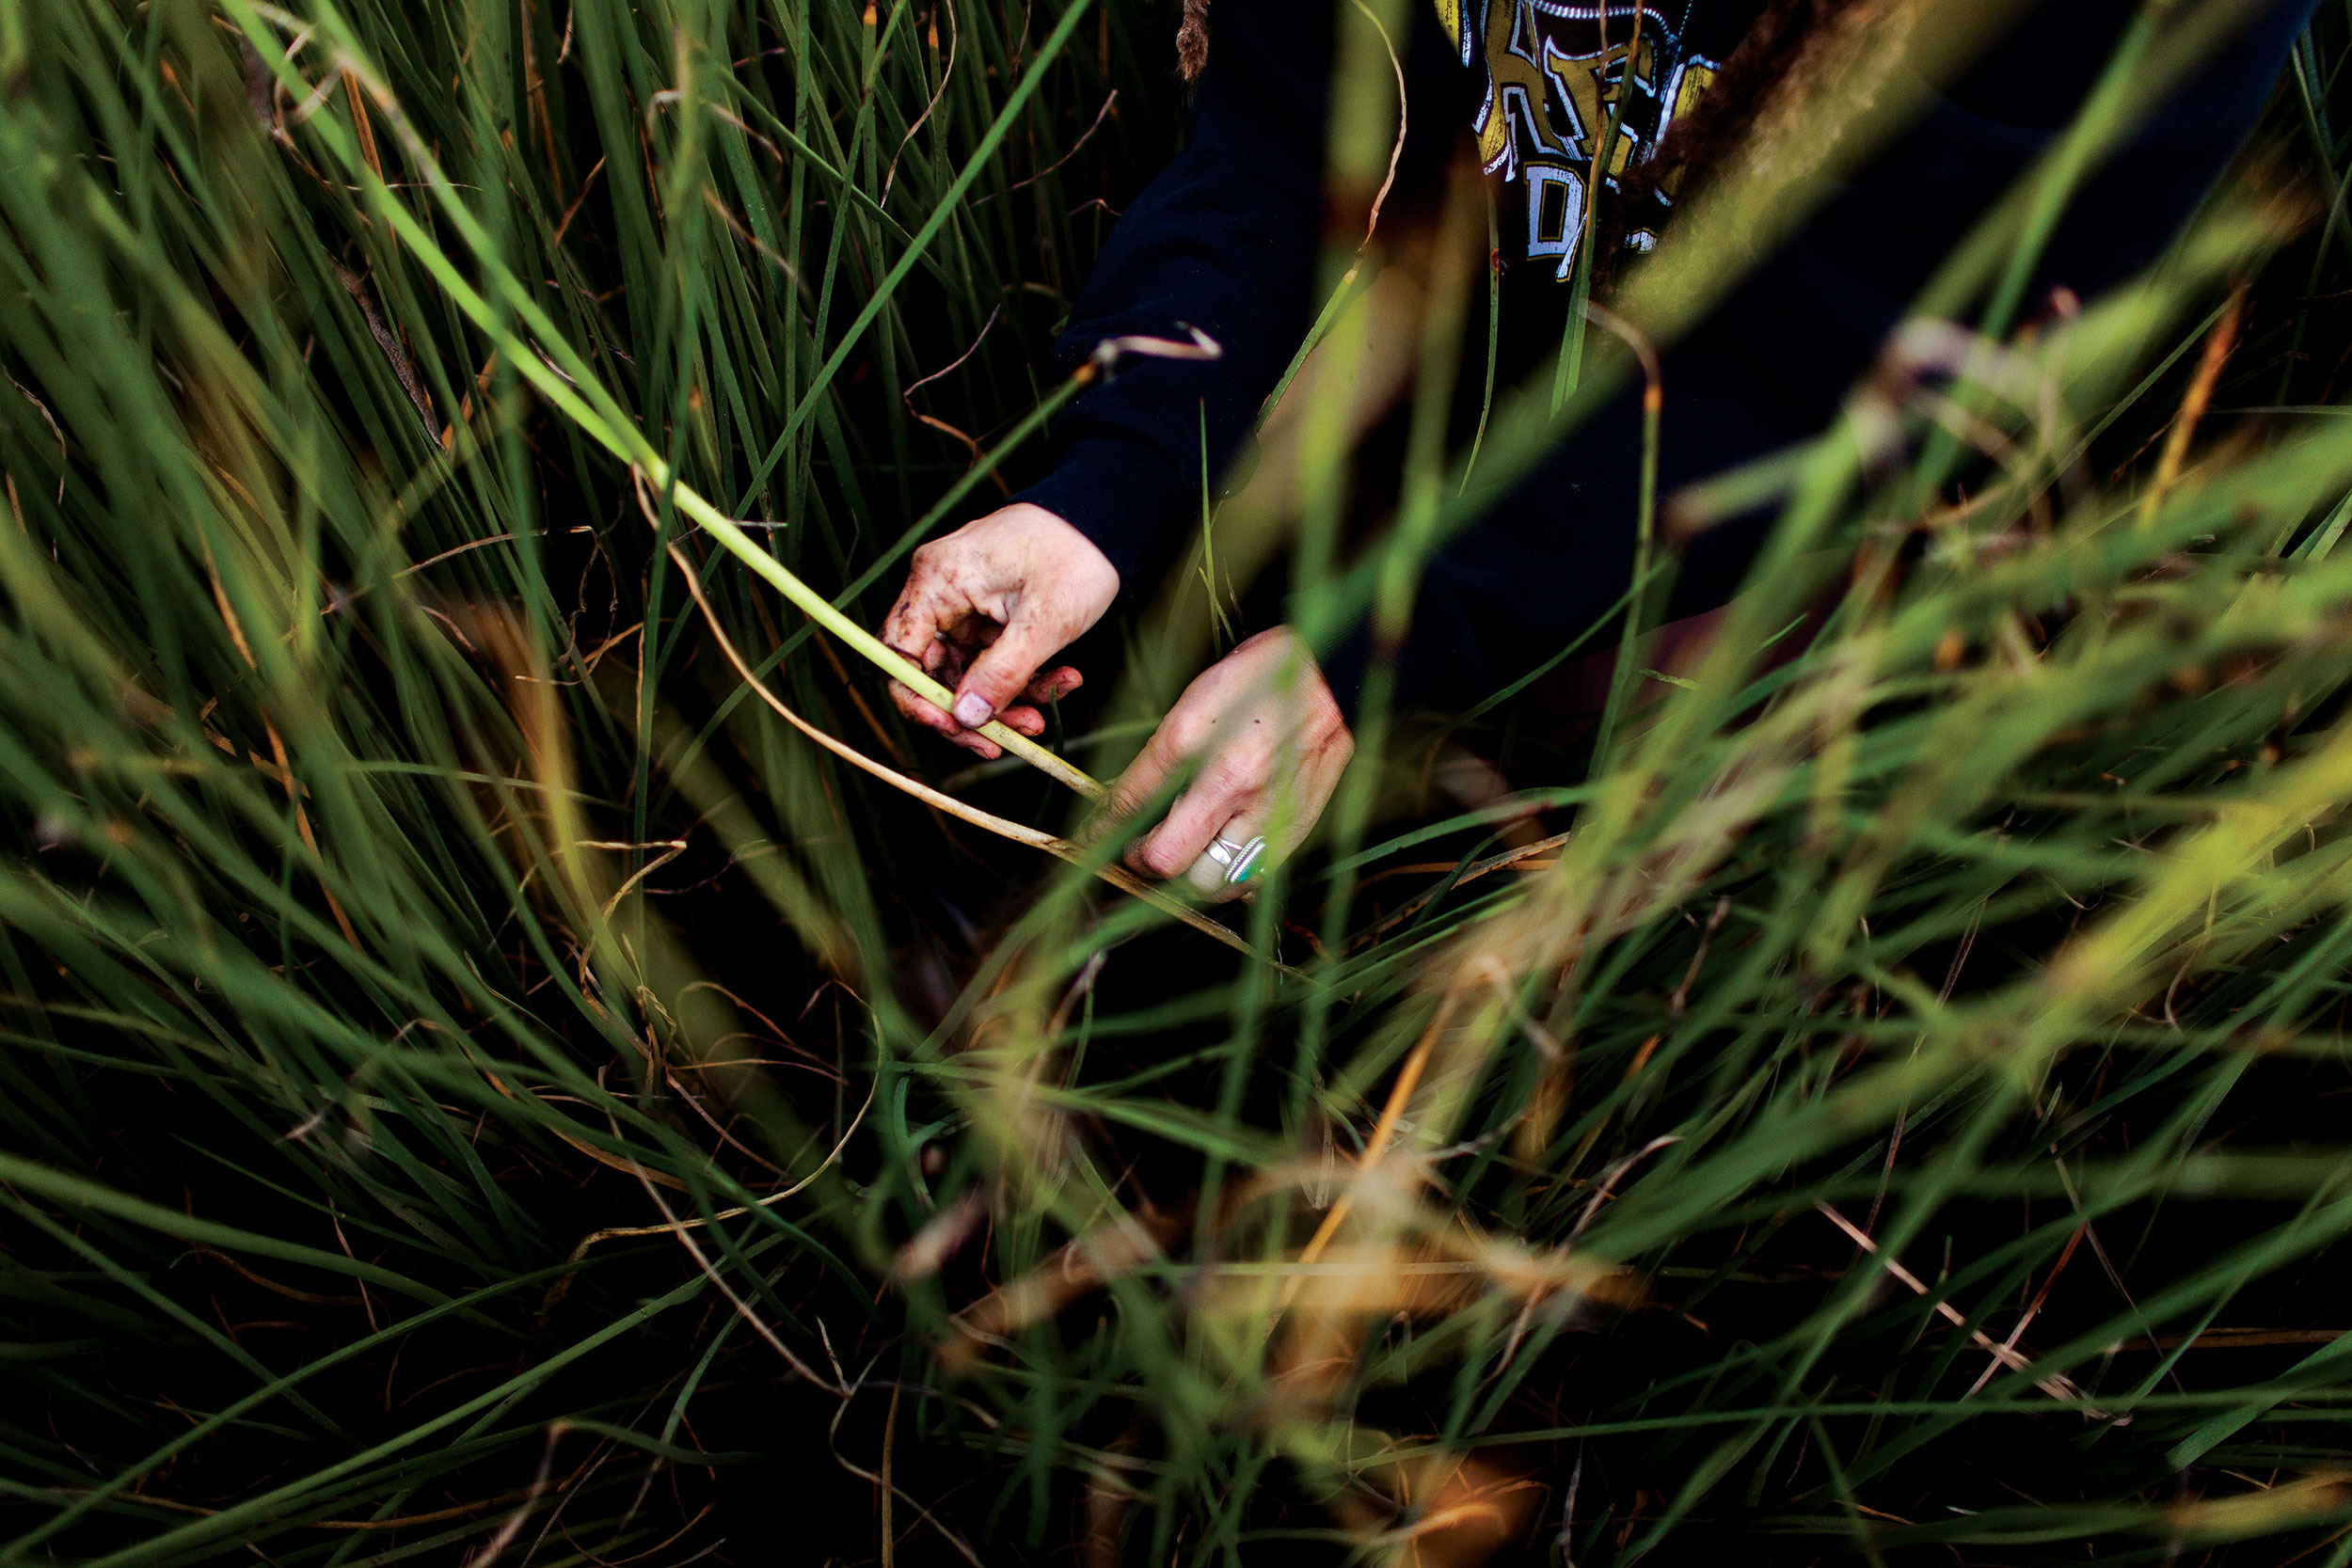 Stephanie Craig going through a grass field, collecting material for her basket weaving.